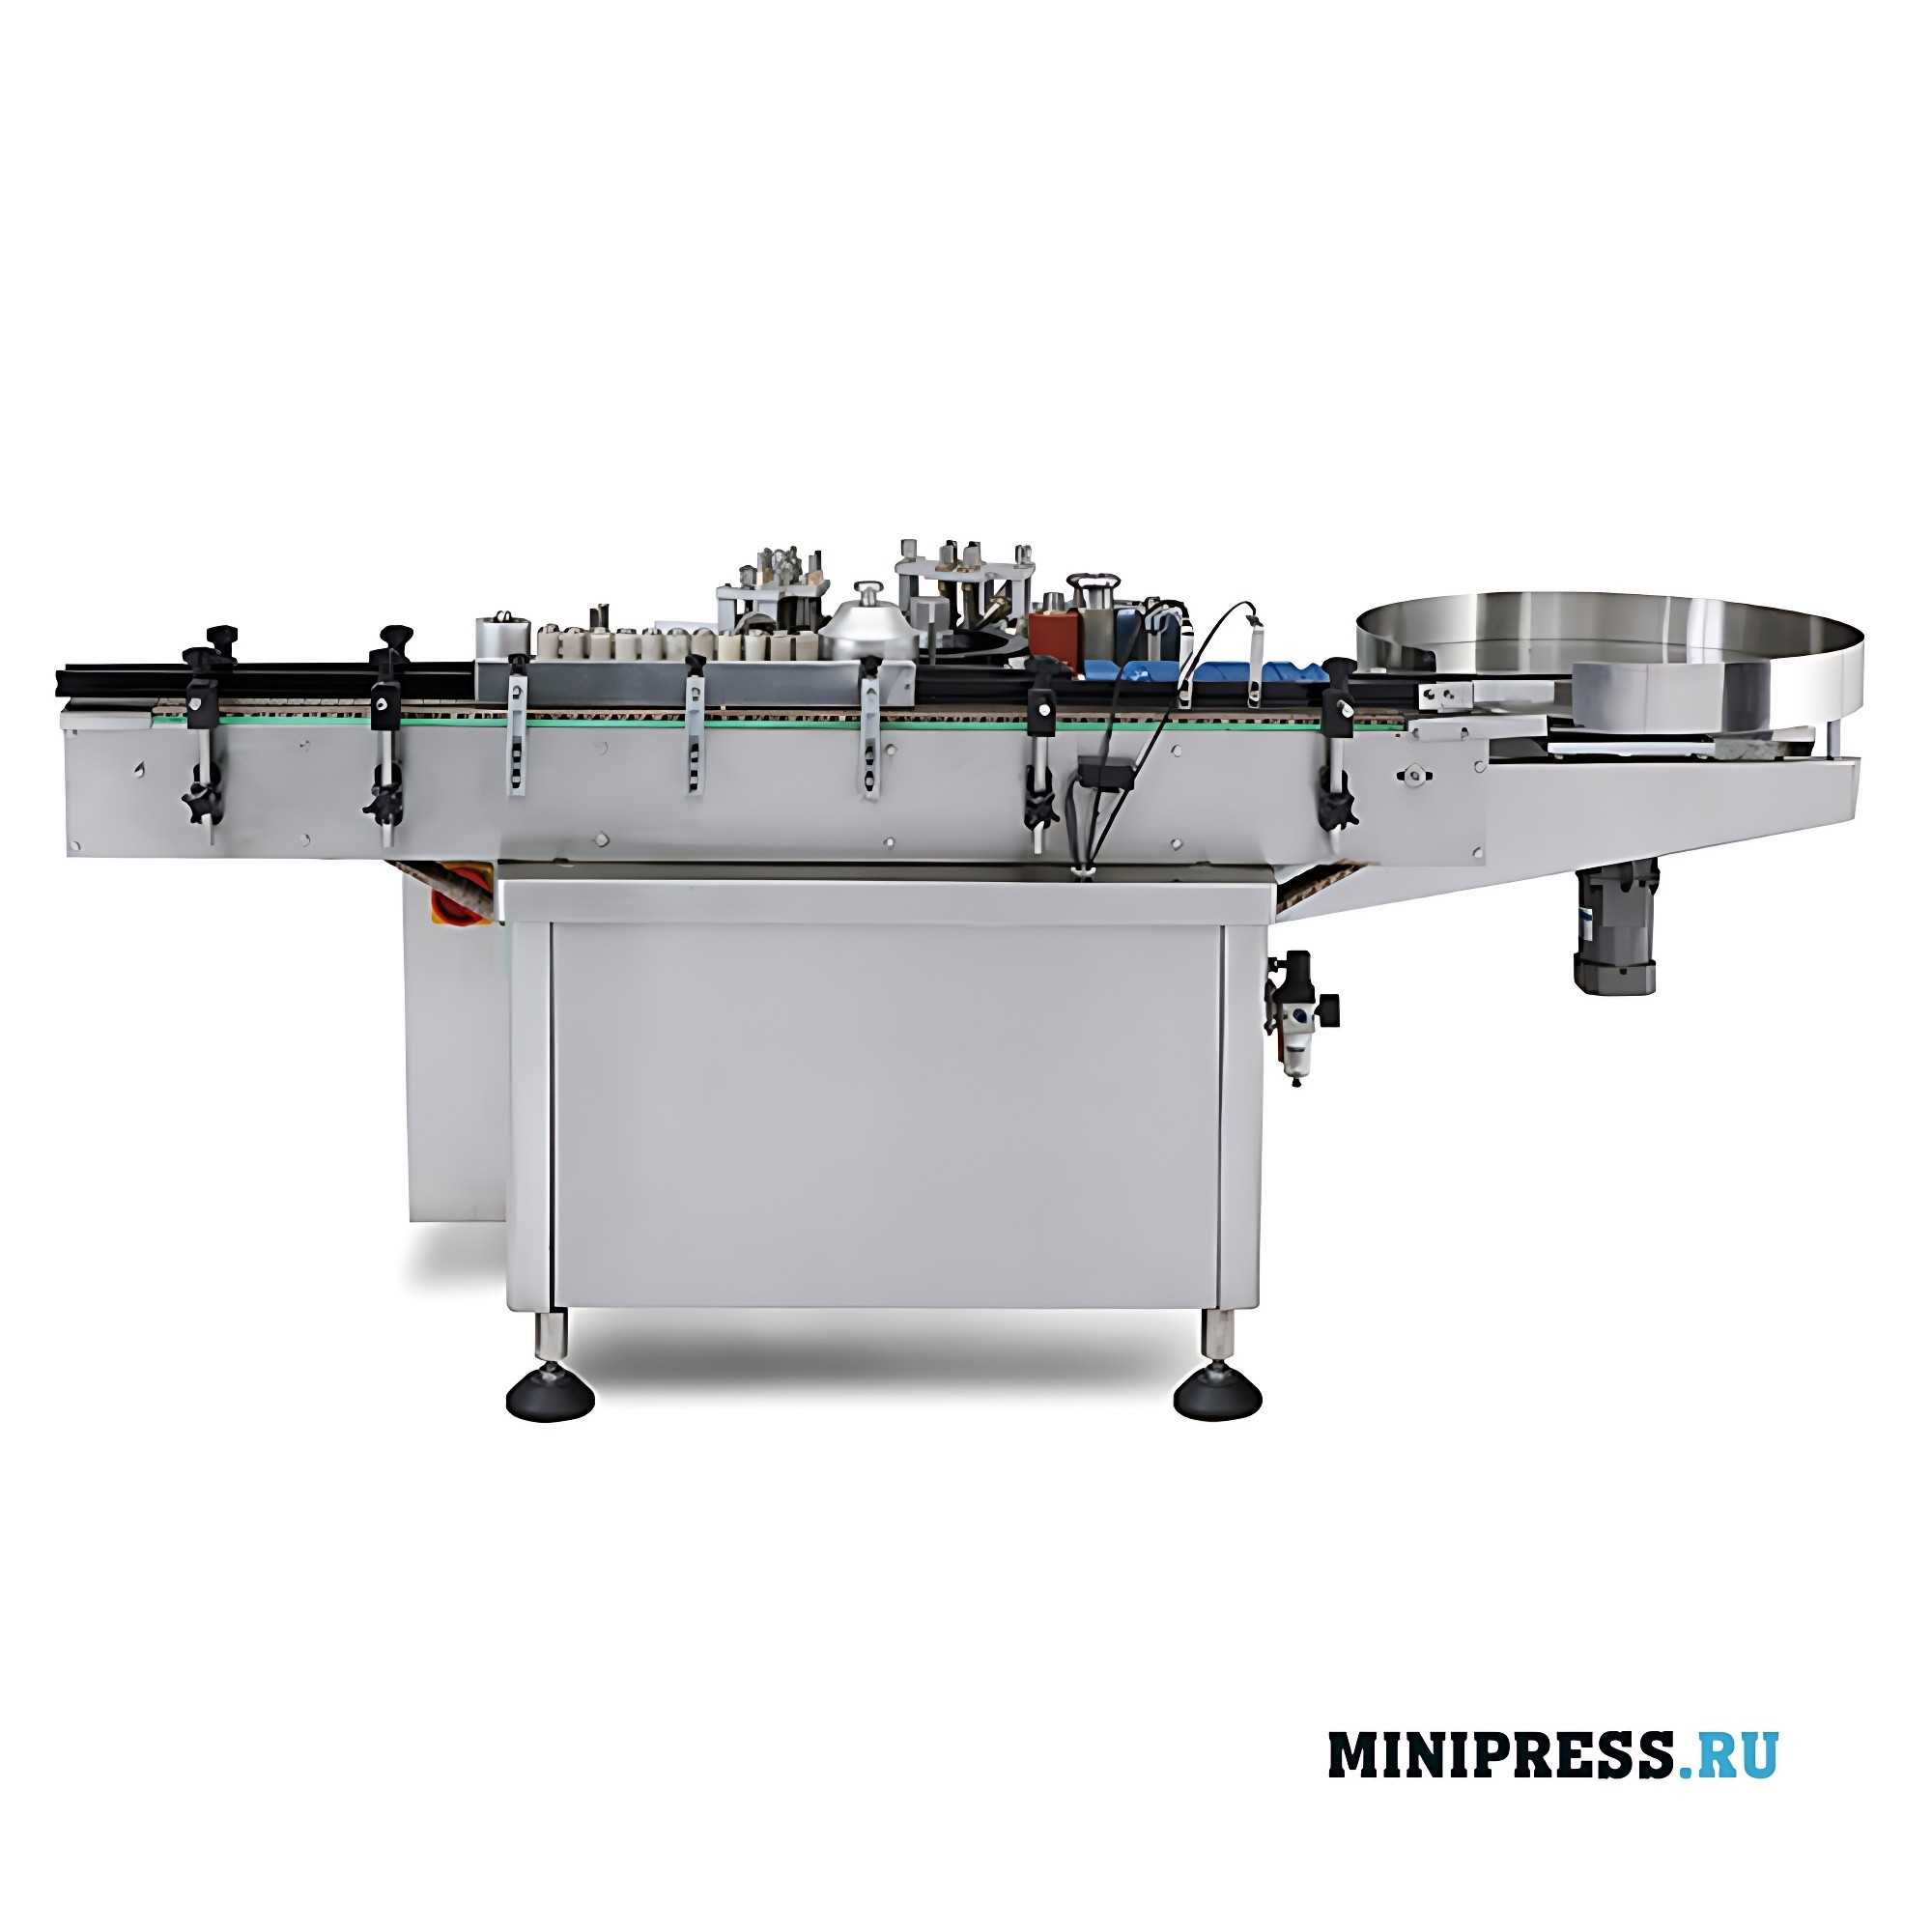 Automatic labeling equipment for adhesive-based labels SYM 4